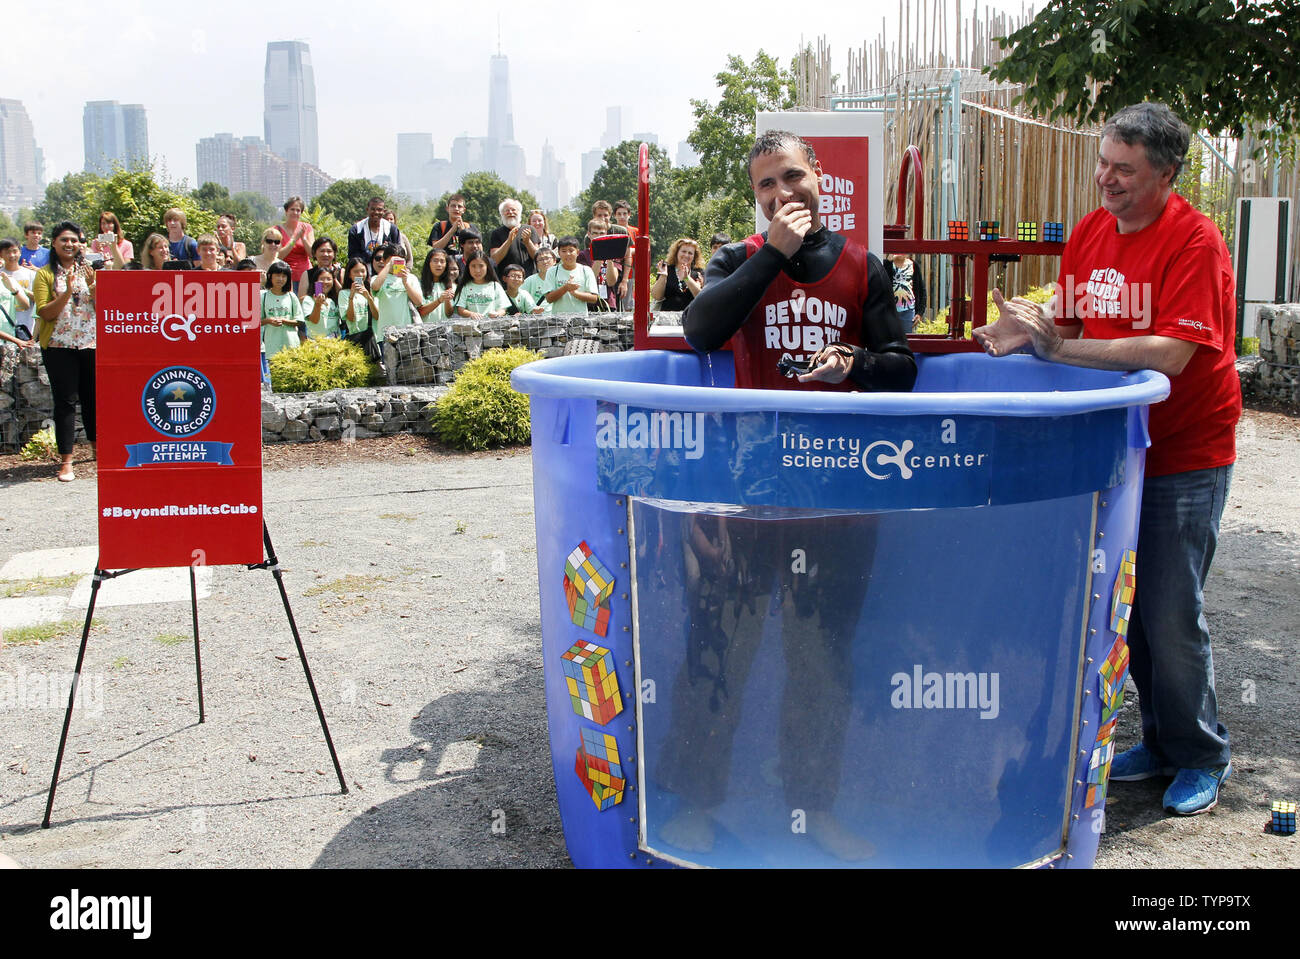 North American Speed Cube Champion Anthony Brooks smiles as he emerges from a water tank after he breaks the Guinness Record for most Rubik's Cube puzzles solved underwater in one breath at National Rubik's Cube Championship at Liberty Science Center in Jersey City, NJ on August 1, 2014. Brooks set a new record solving 5 cubes in 1:18 beating the old record of record 4 cubes solved in 1:30. UPI/John Angelillo Stock Photo